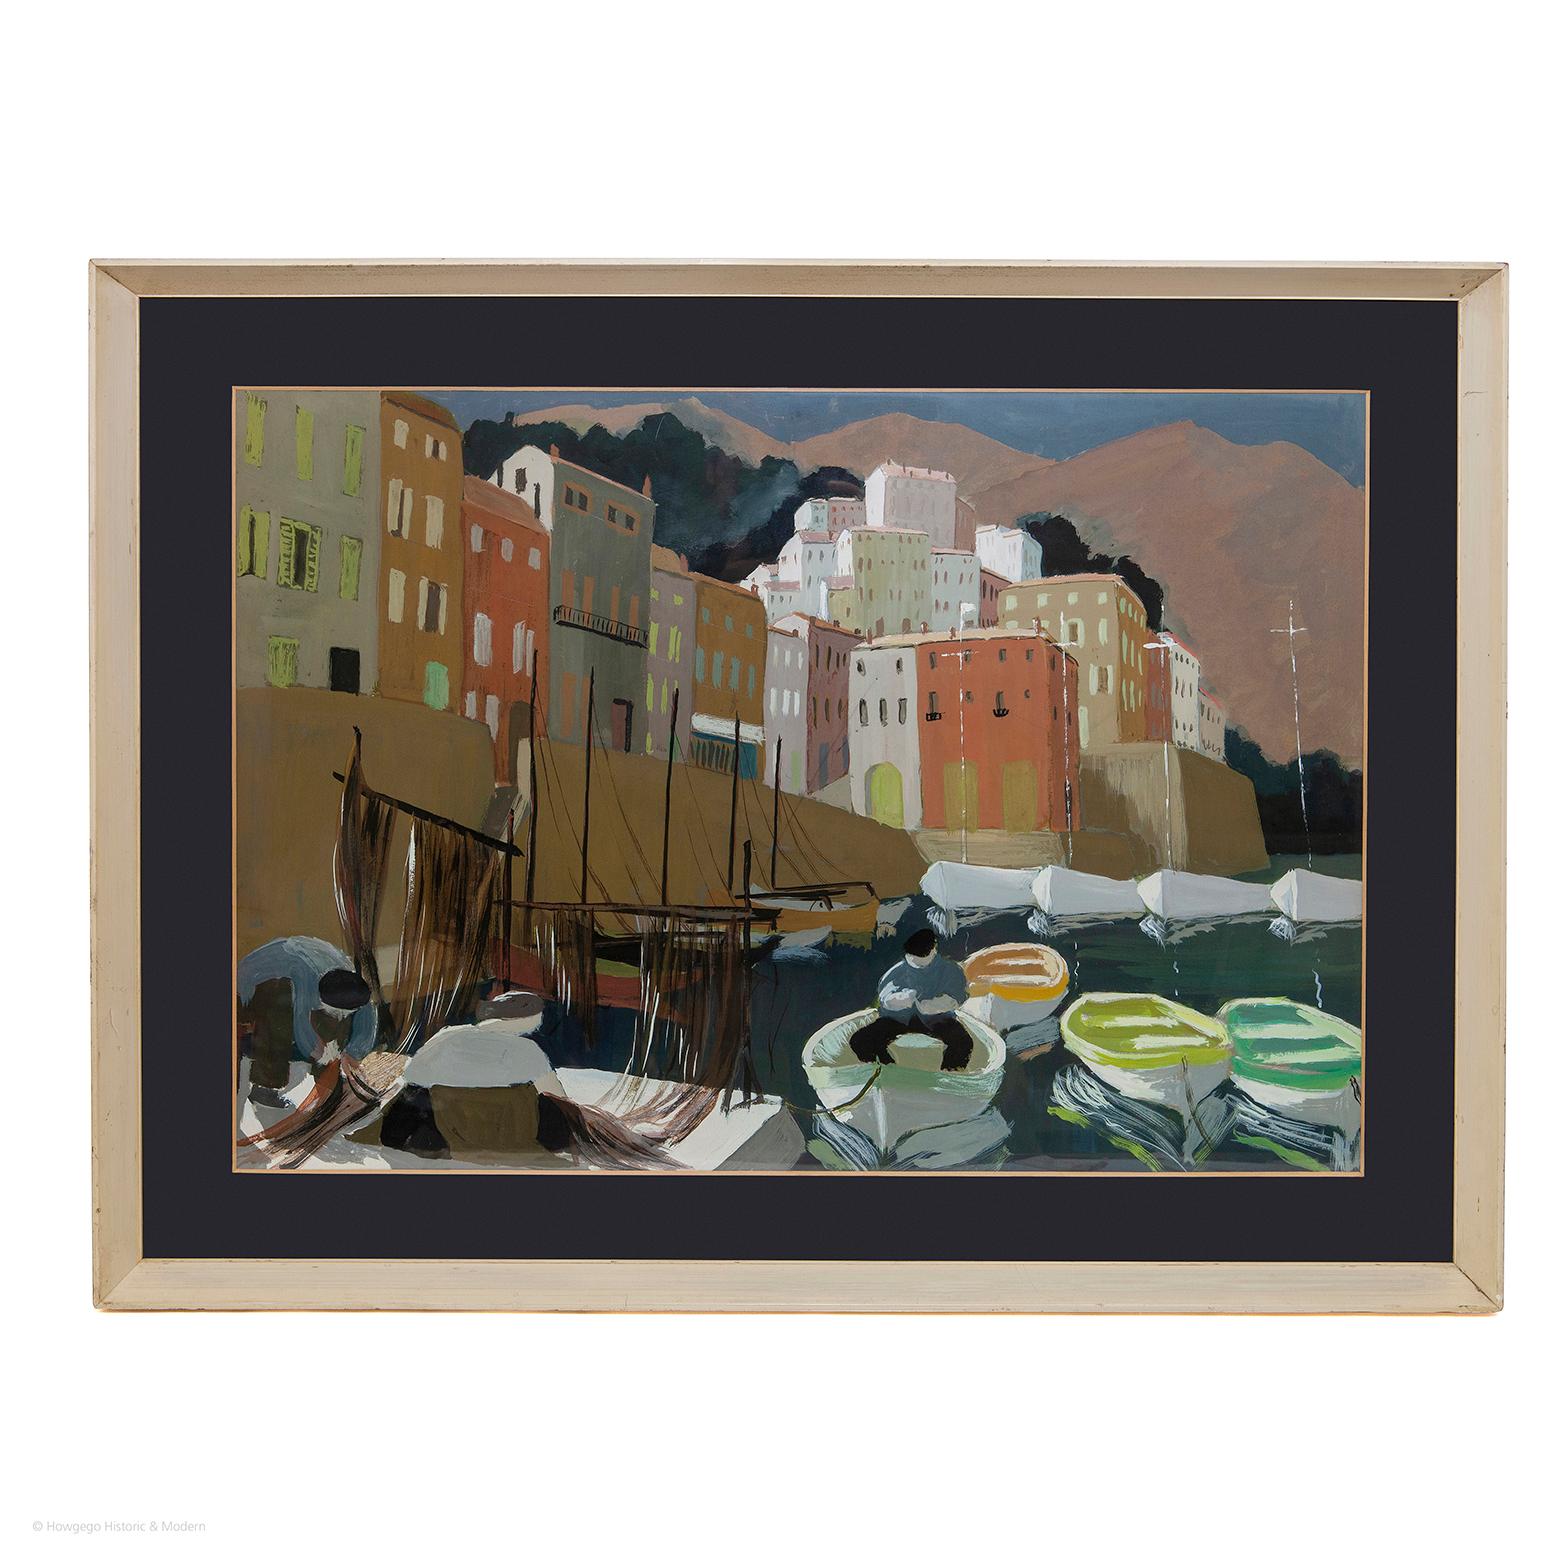 Mediterranean Fishing Village, Gouache, In original frame, Mid-Century Modern, artist unknown, c1950

Charming composition of fishermen mending their nets at the end of the day with the sunset reflected in the mountains beyond the coastal town.